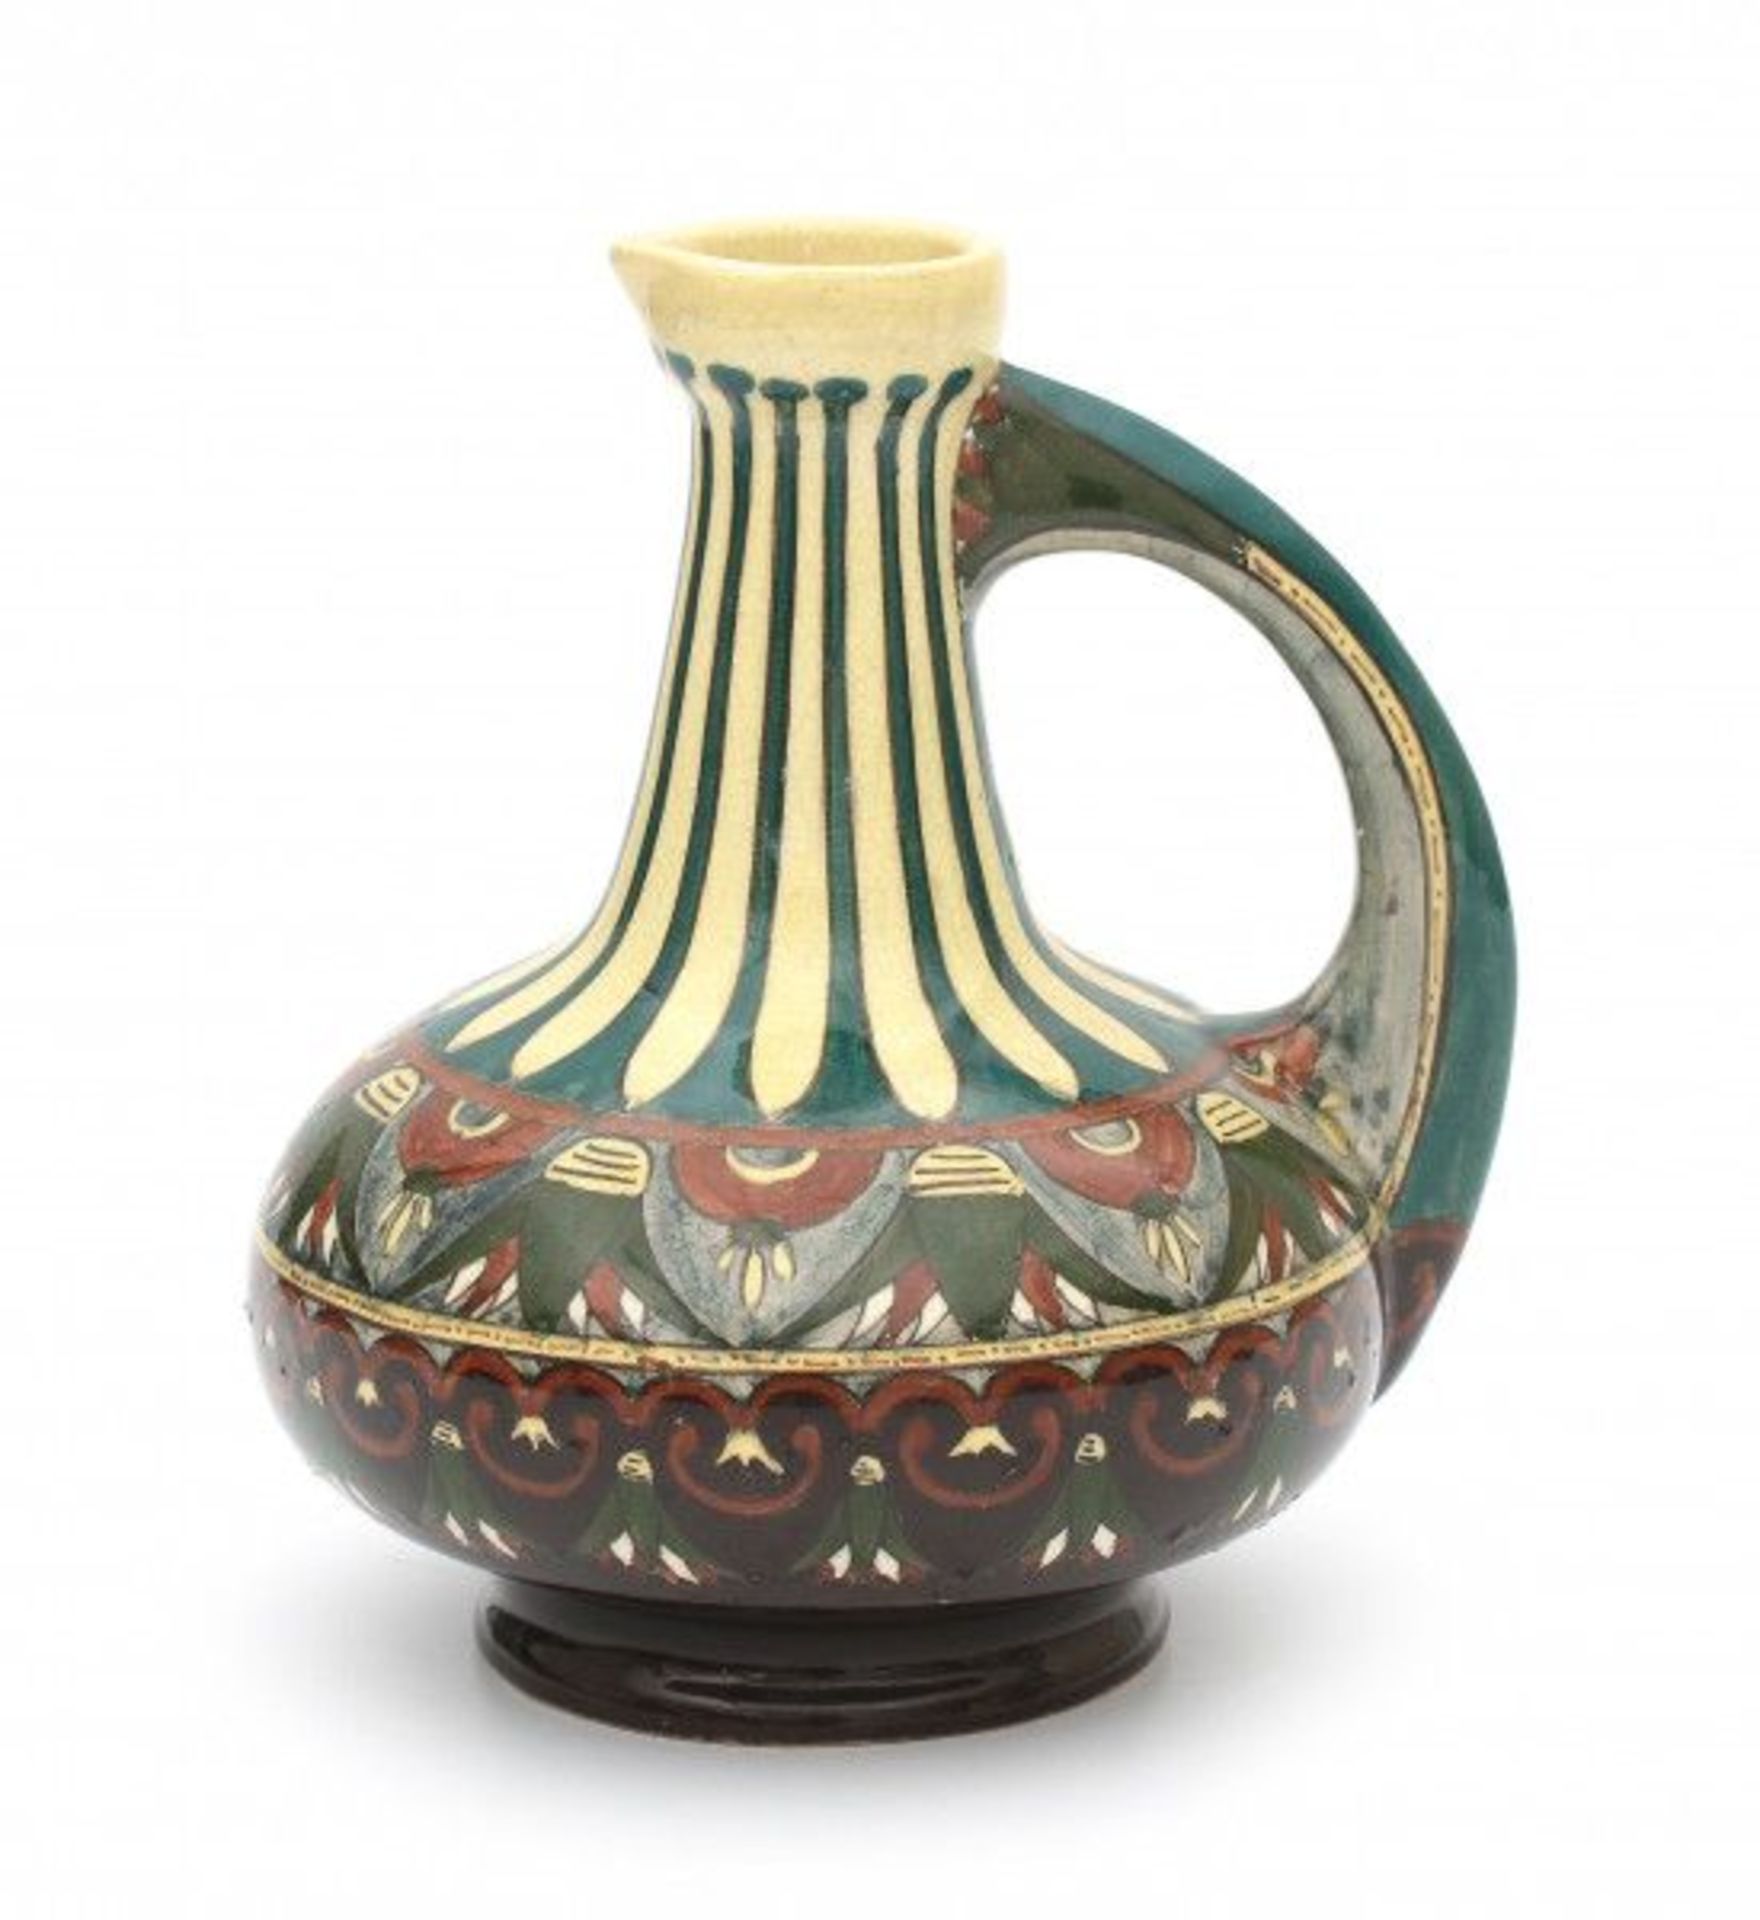 Wed. Brantjes & Co., PurmerendA ceramic pitcher with repeating stylized floral pattern, signed